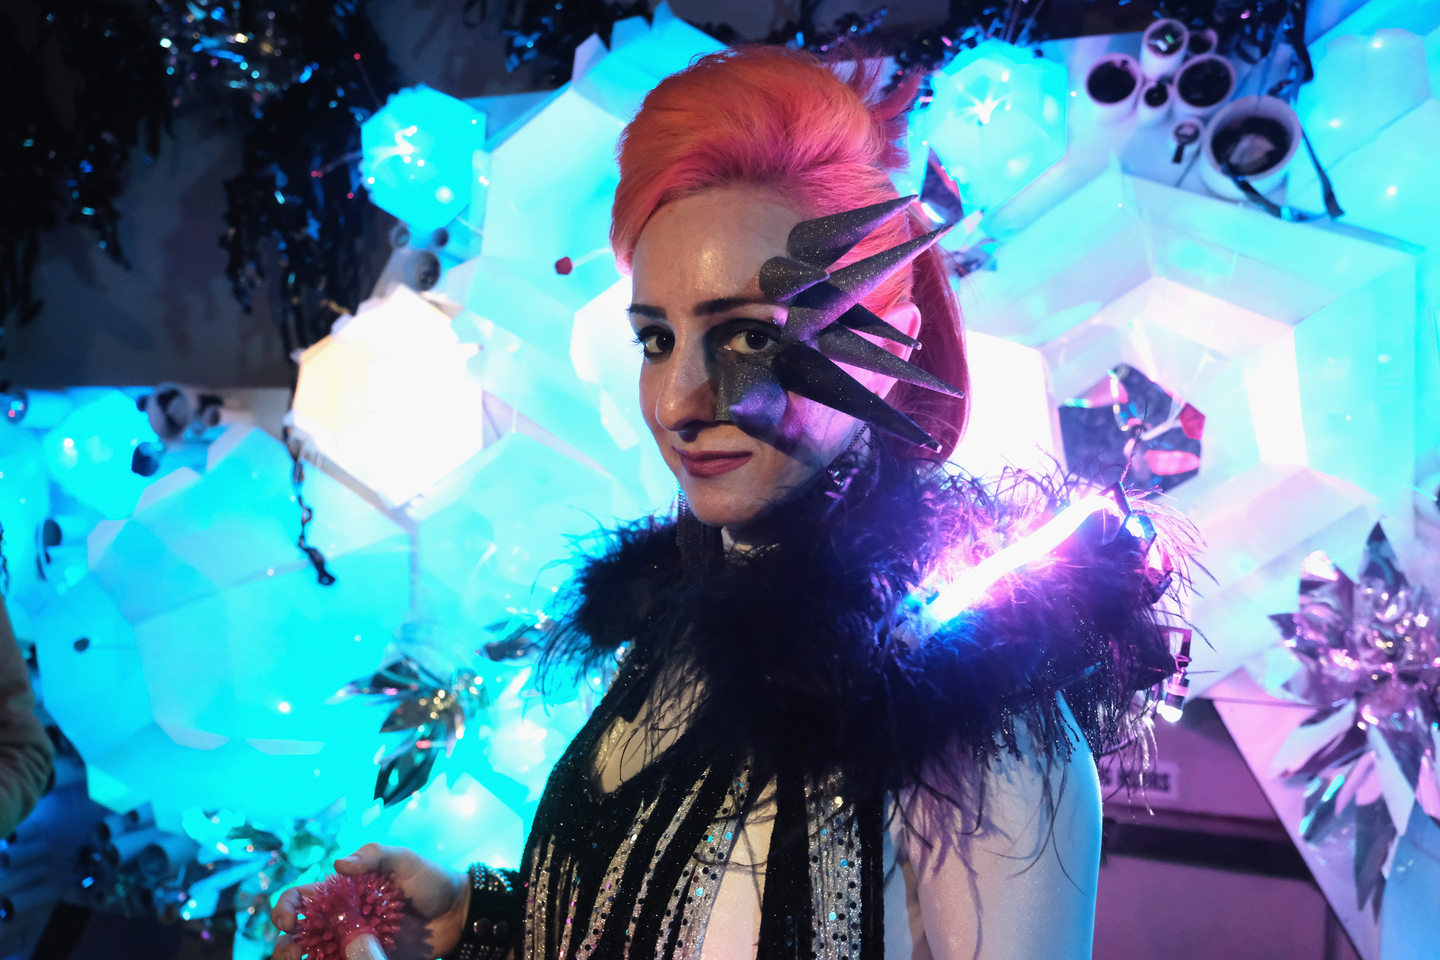 Meow Wolf hosted the “Meow Wolf: Fractallage” event at Empire Garage. Photo by Hubert Vestil/Getty Images for SXSW